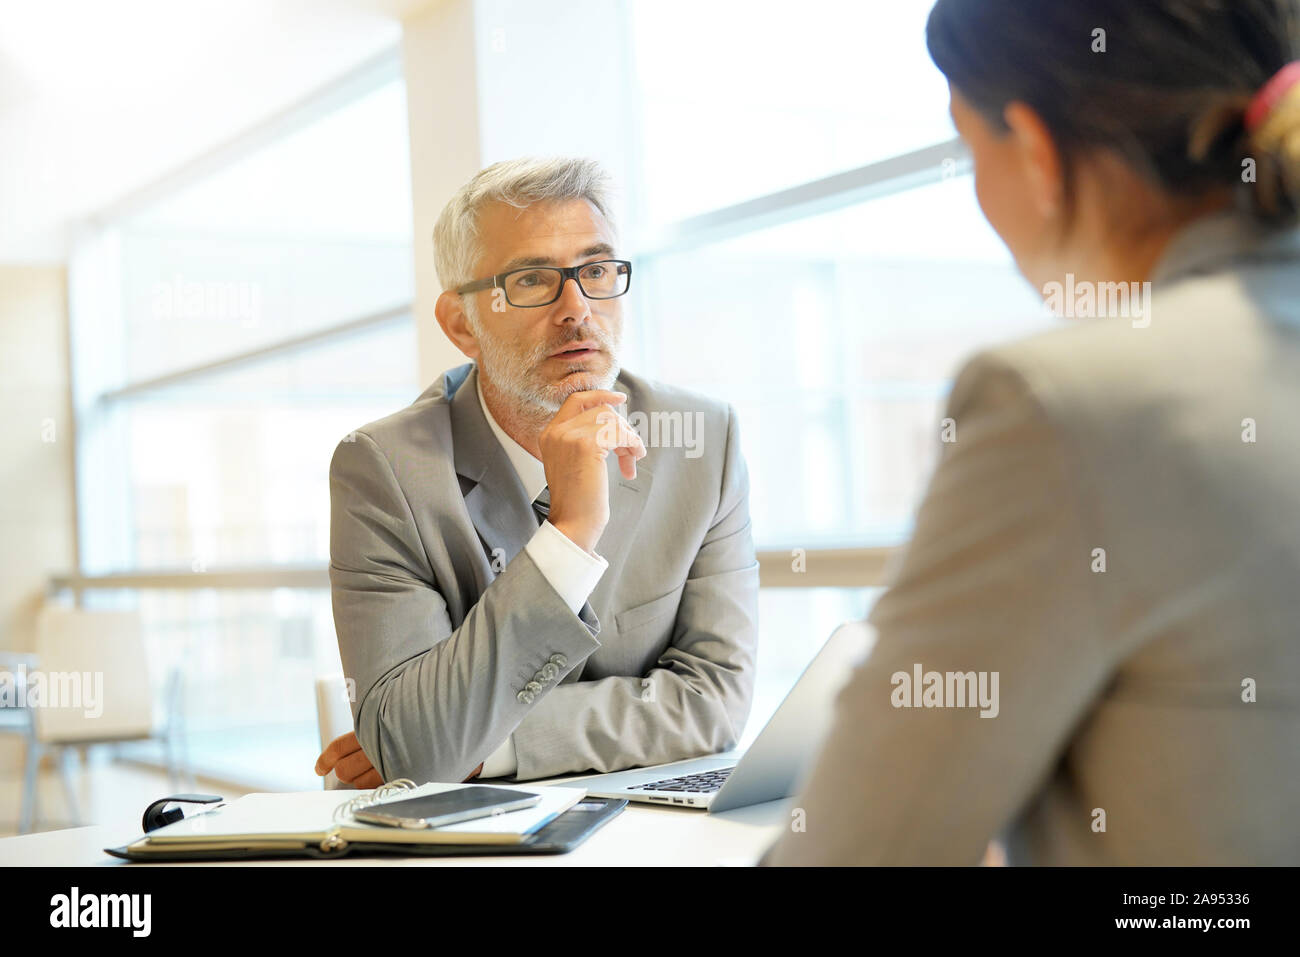 Coporate interview between executive and candidate Stock Photo